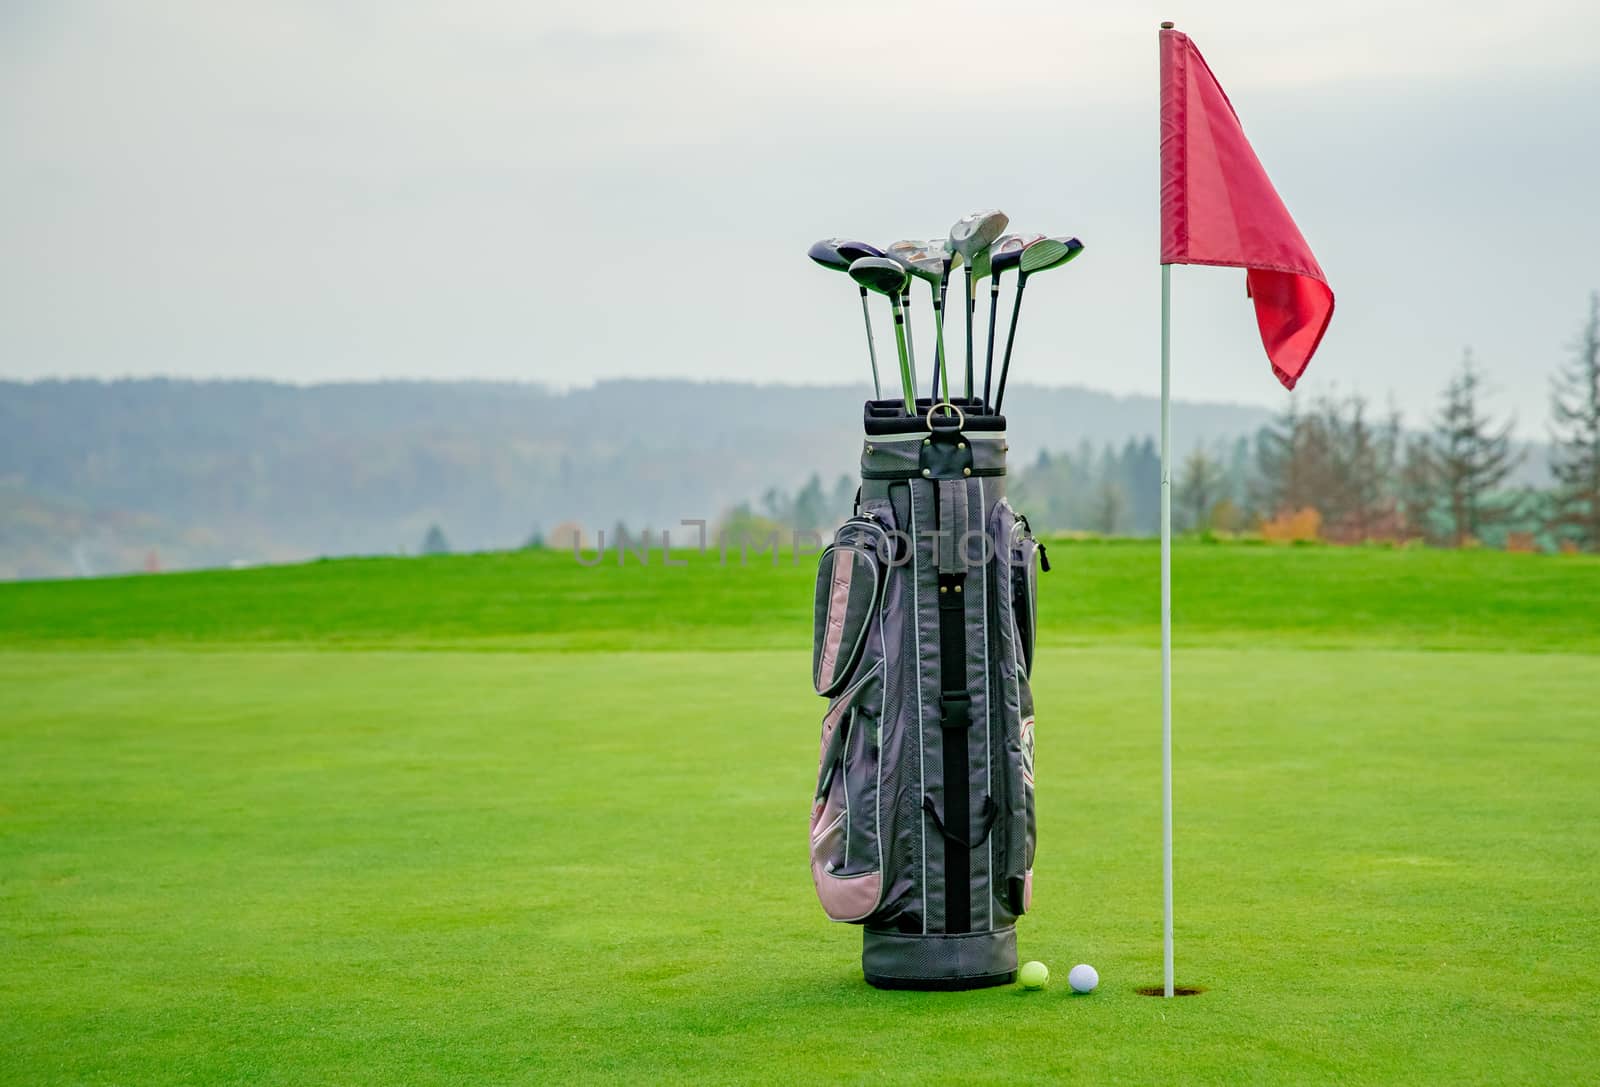 bag with golf equipment on green pitch.